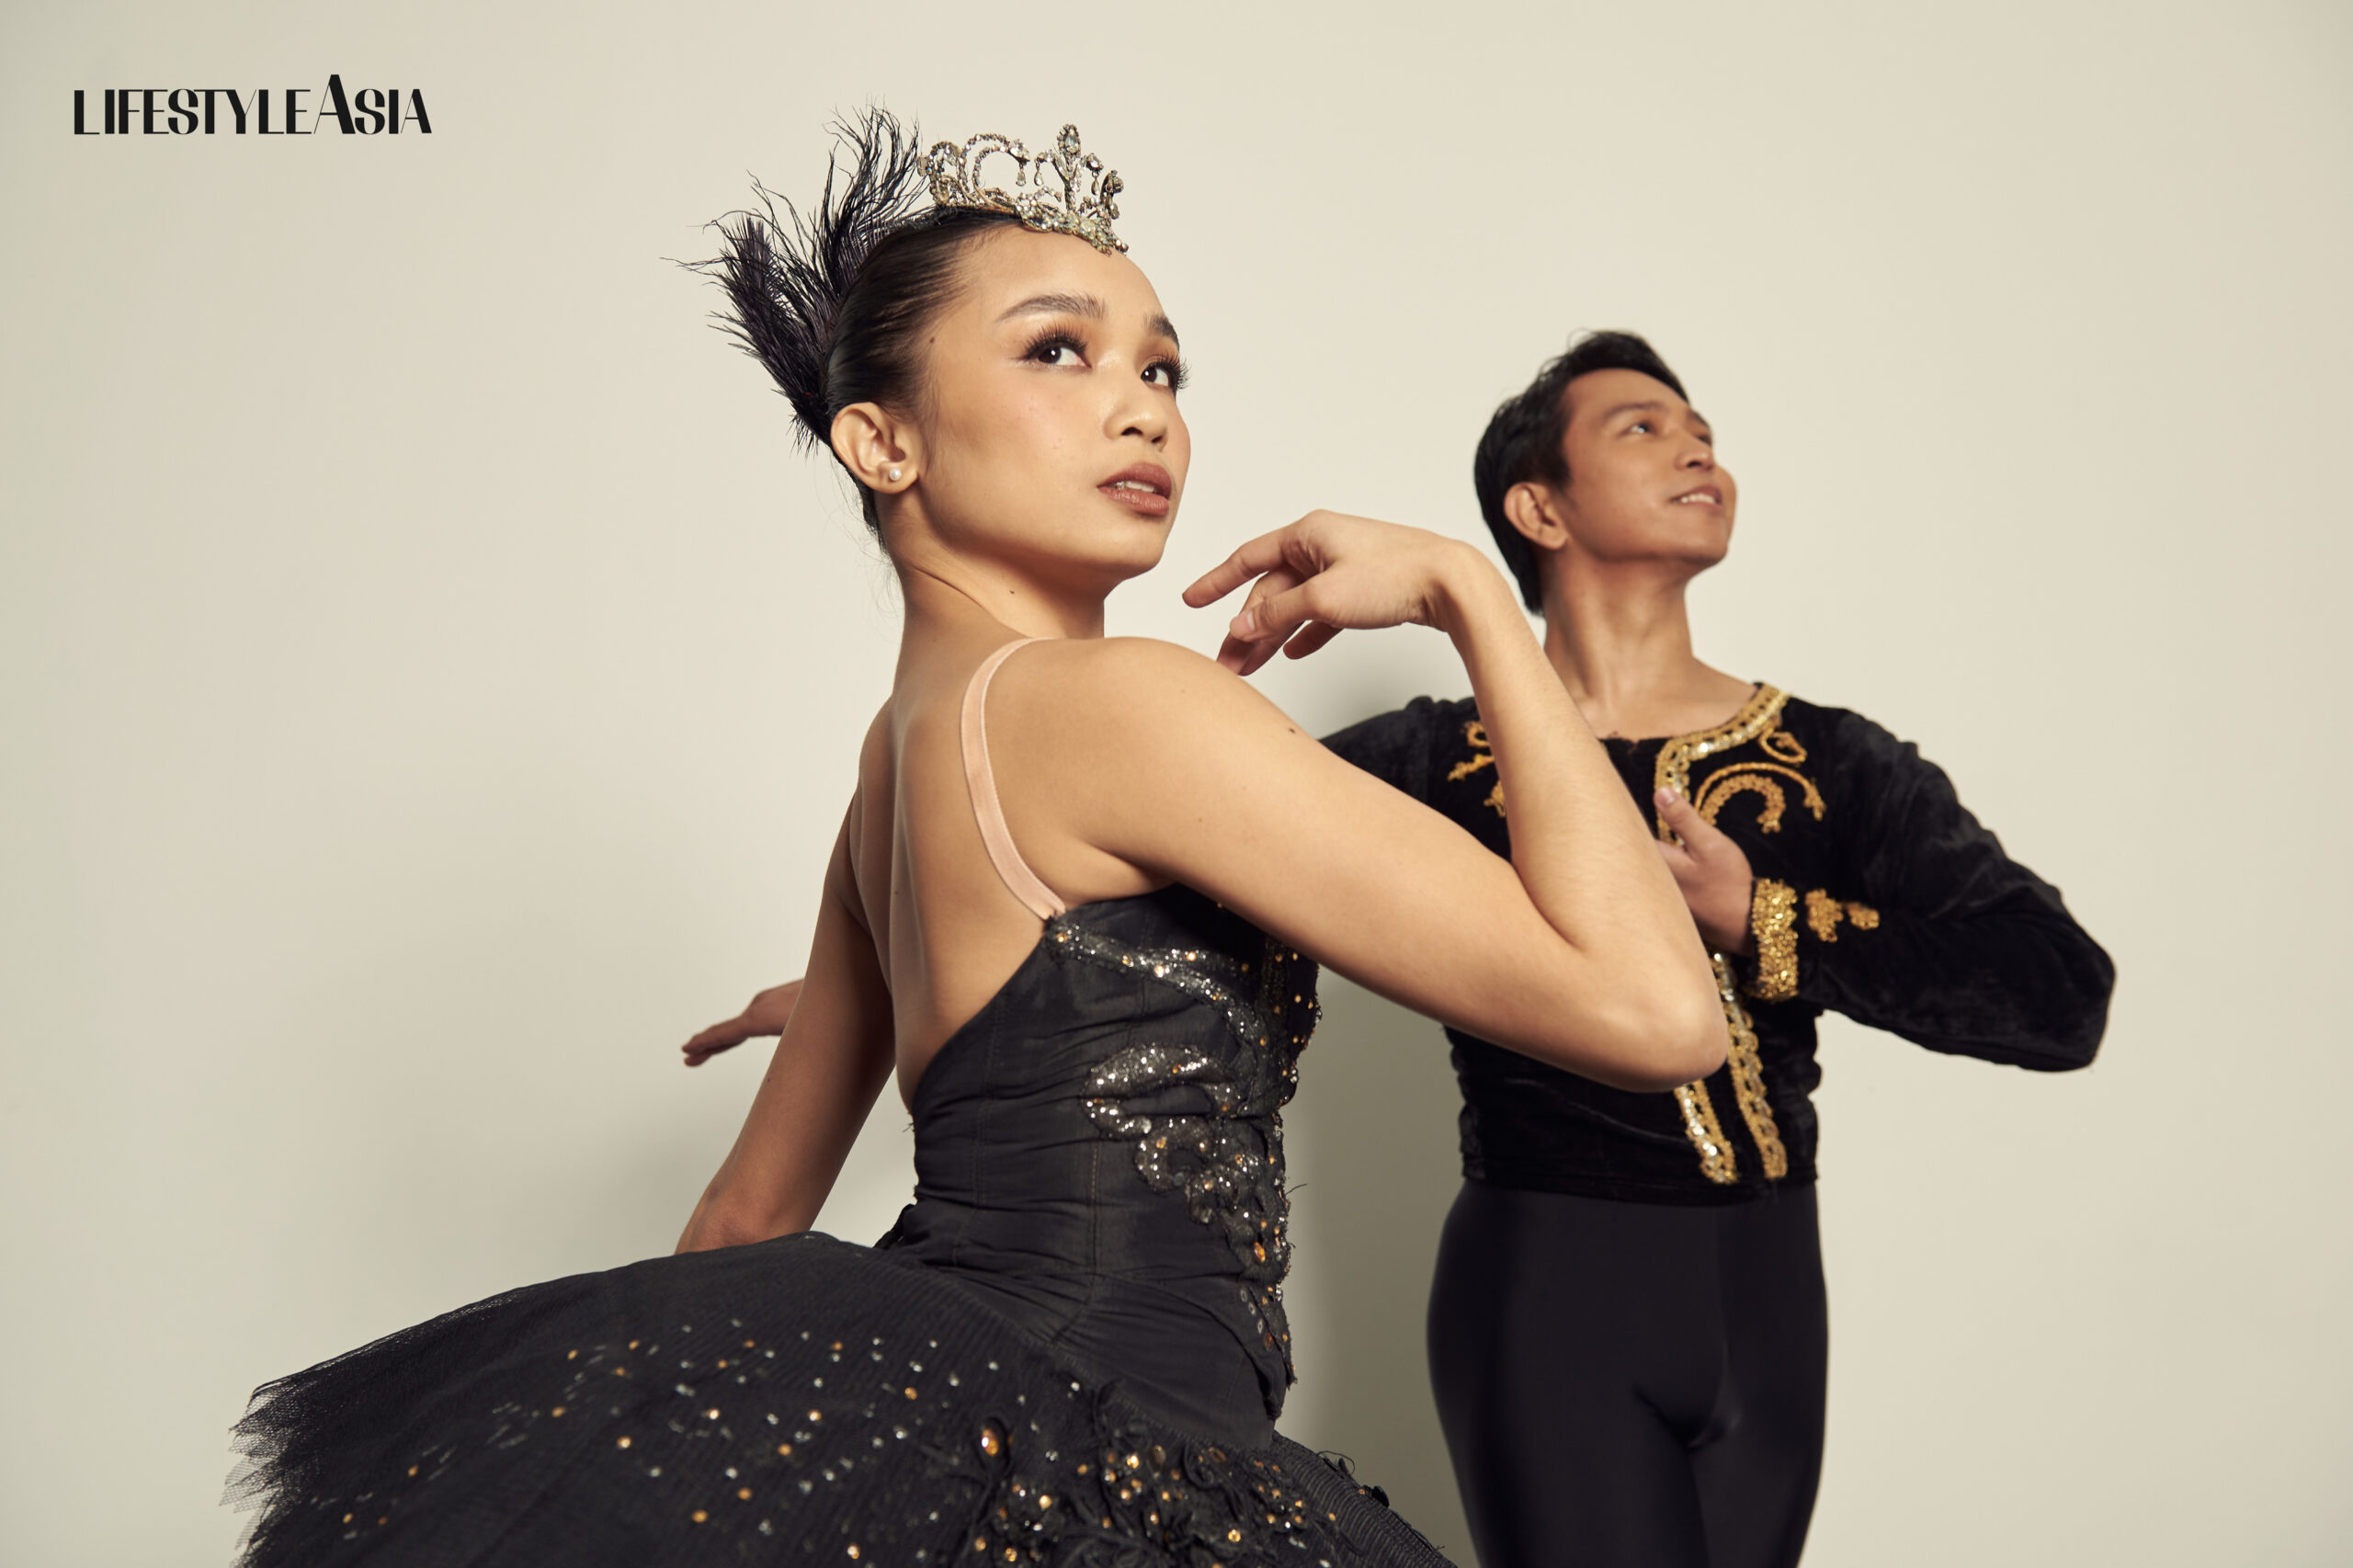 Reyes as Odile and Ocampo as the Prince from Swan Lake